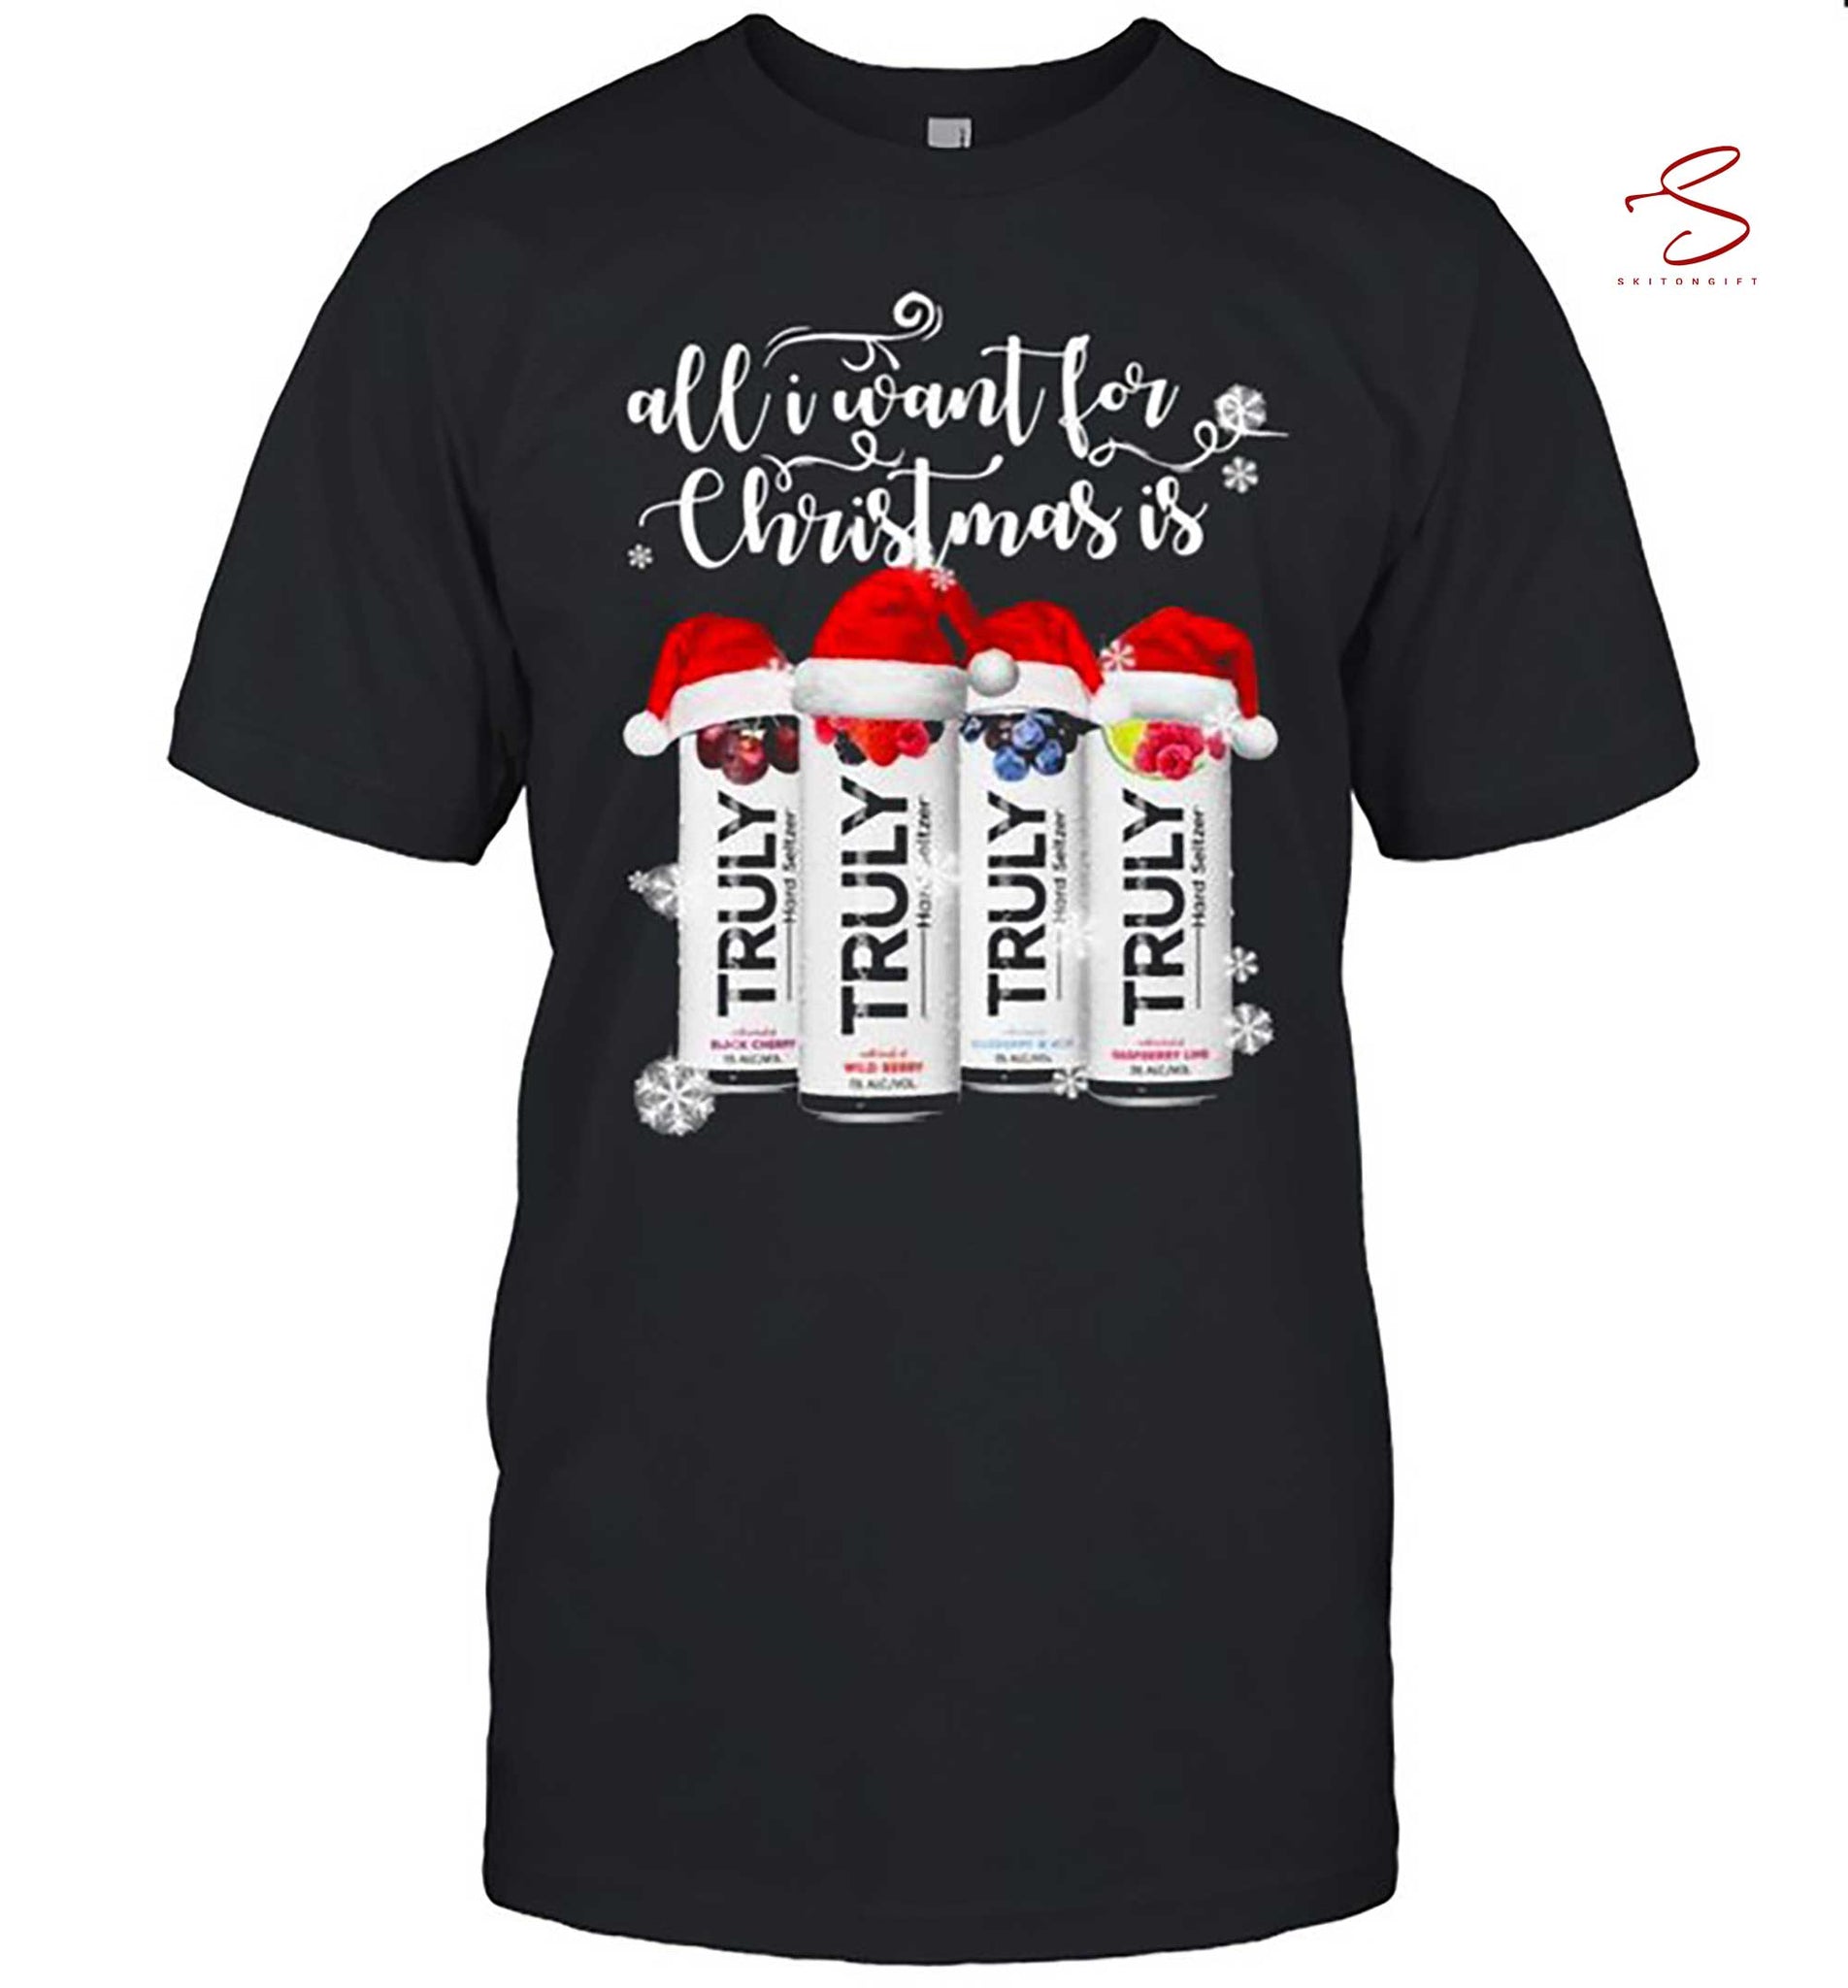 Skitongift All I Want For Christmas Is Truly Christmas Shirt